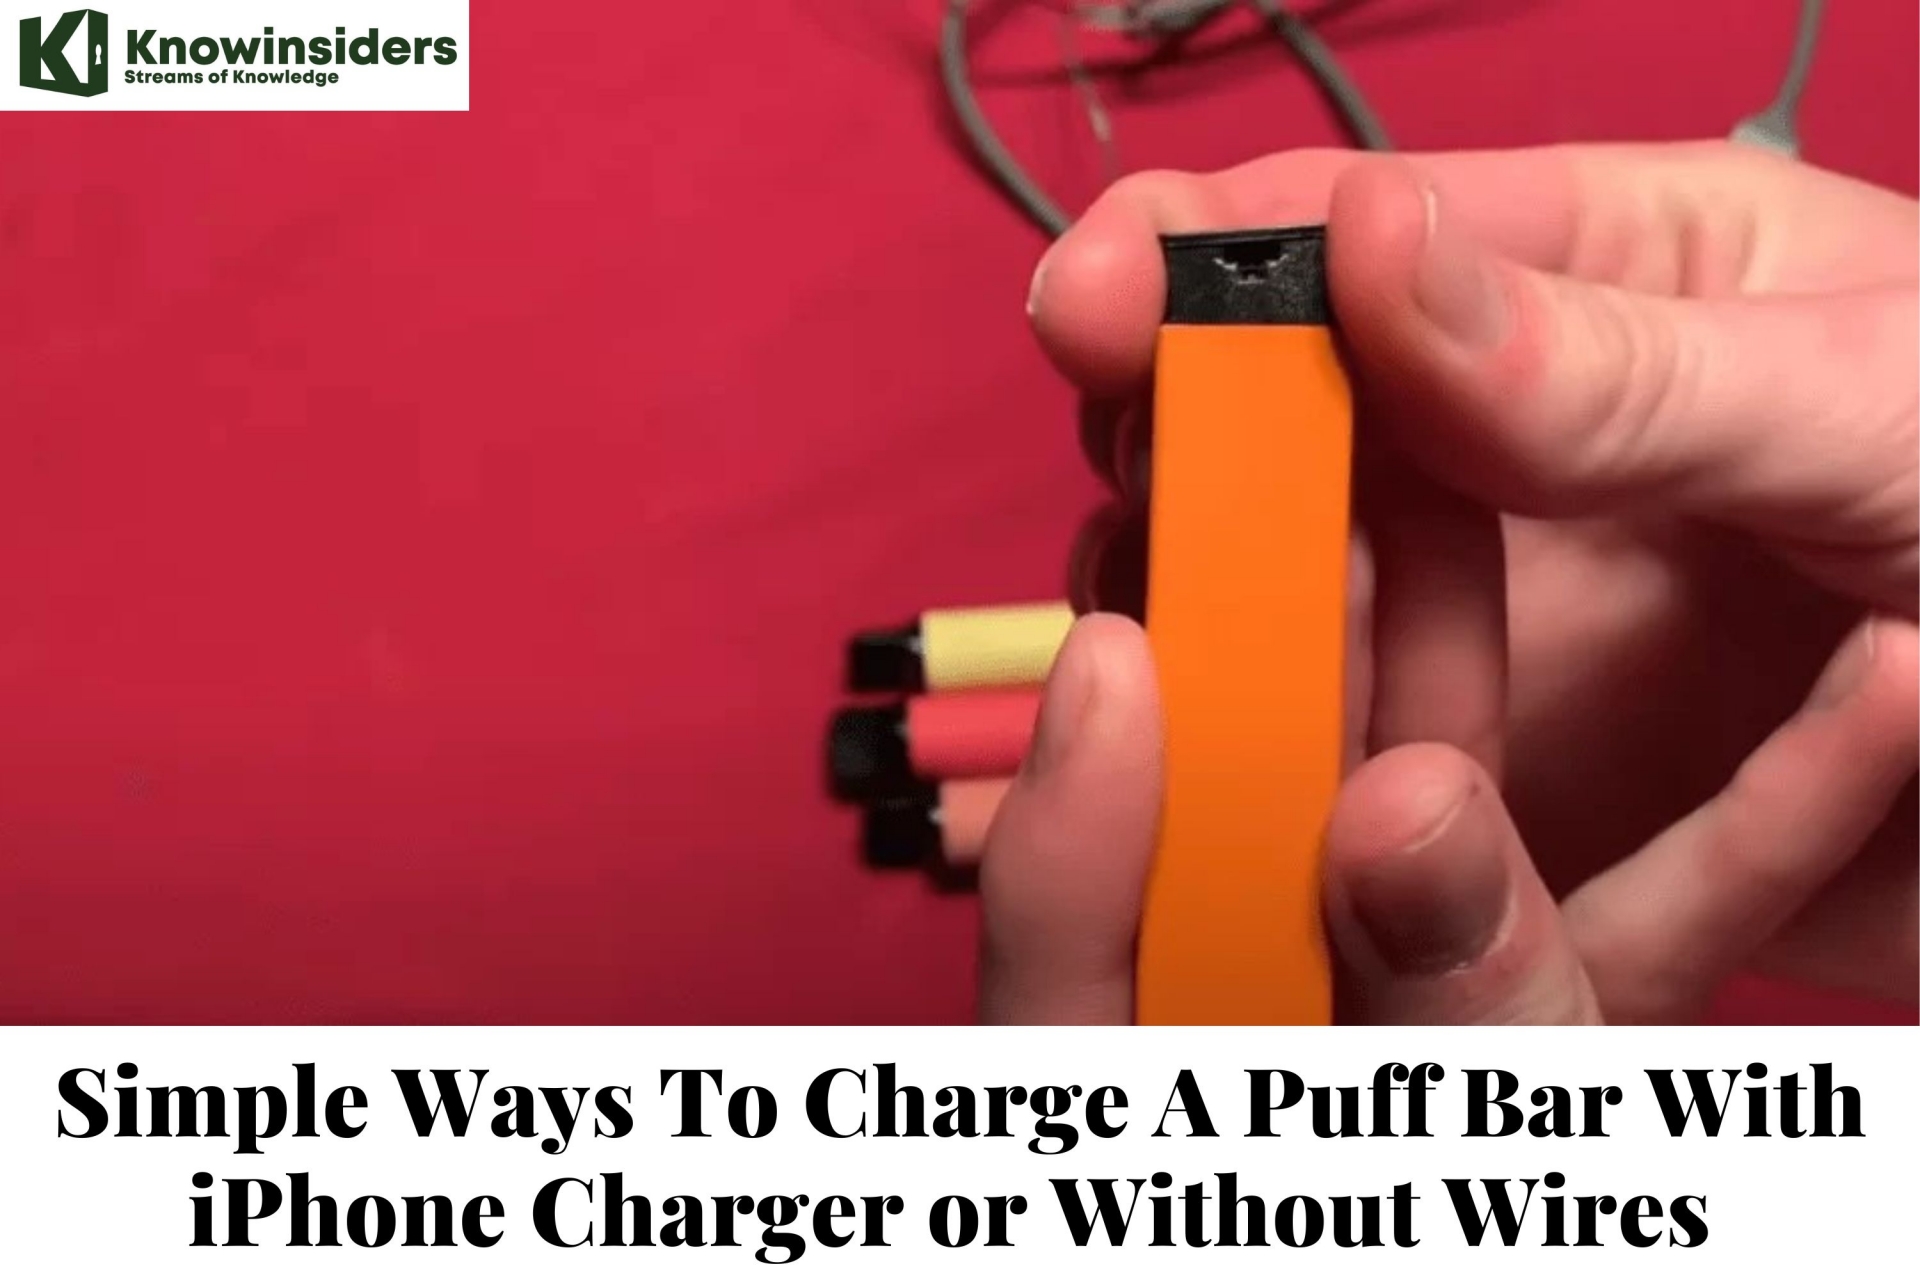 Simple Ways To Charge A Puff Bar With iPhone Charger or Without Wires